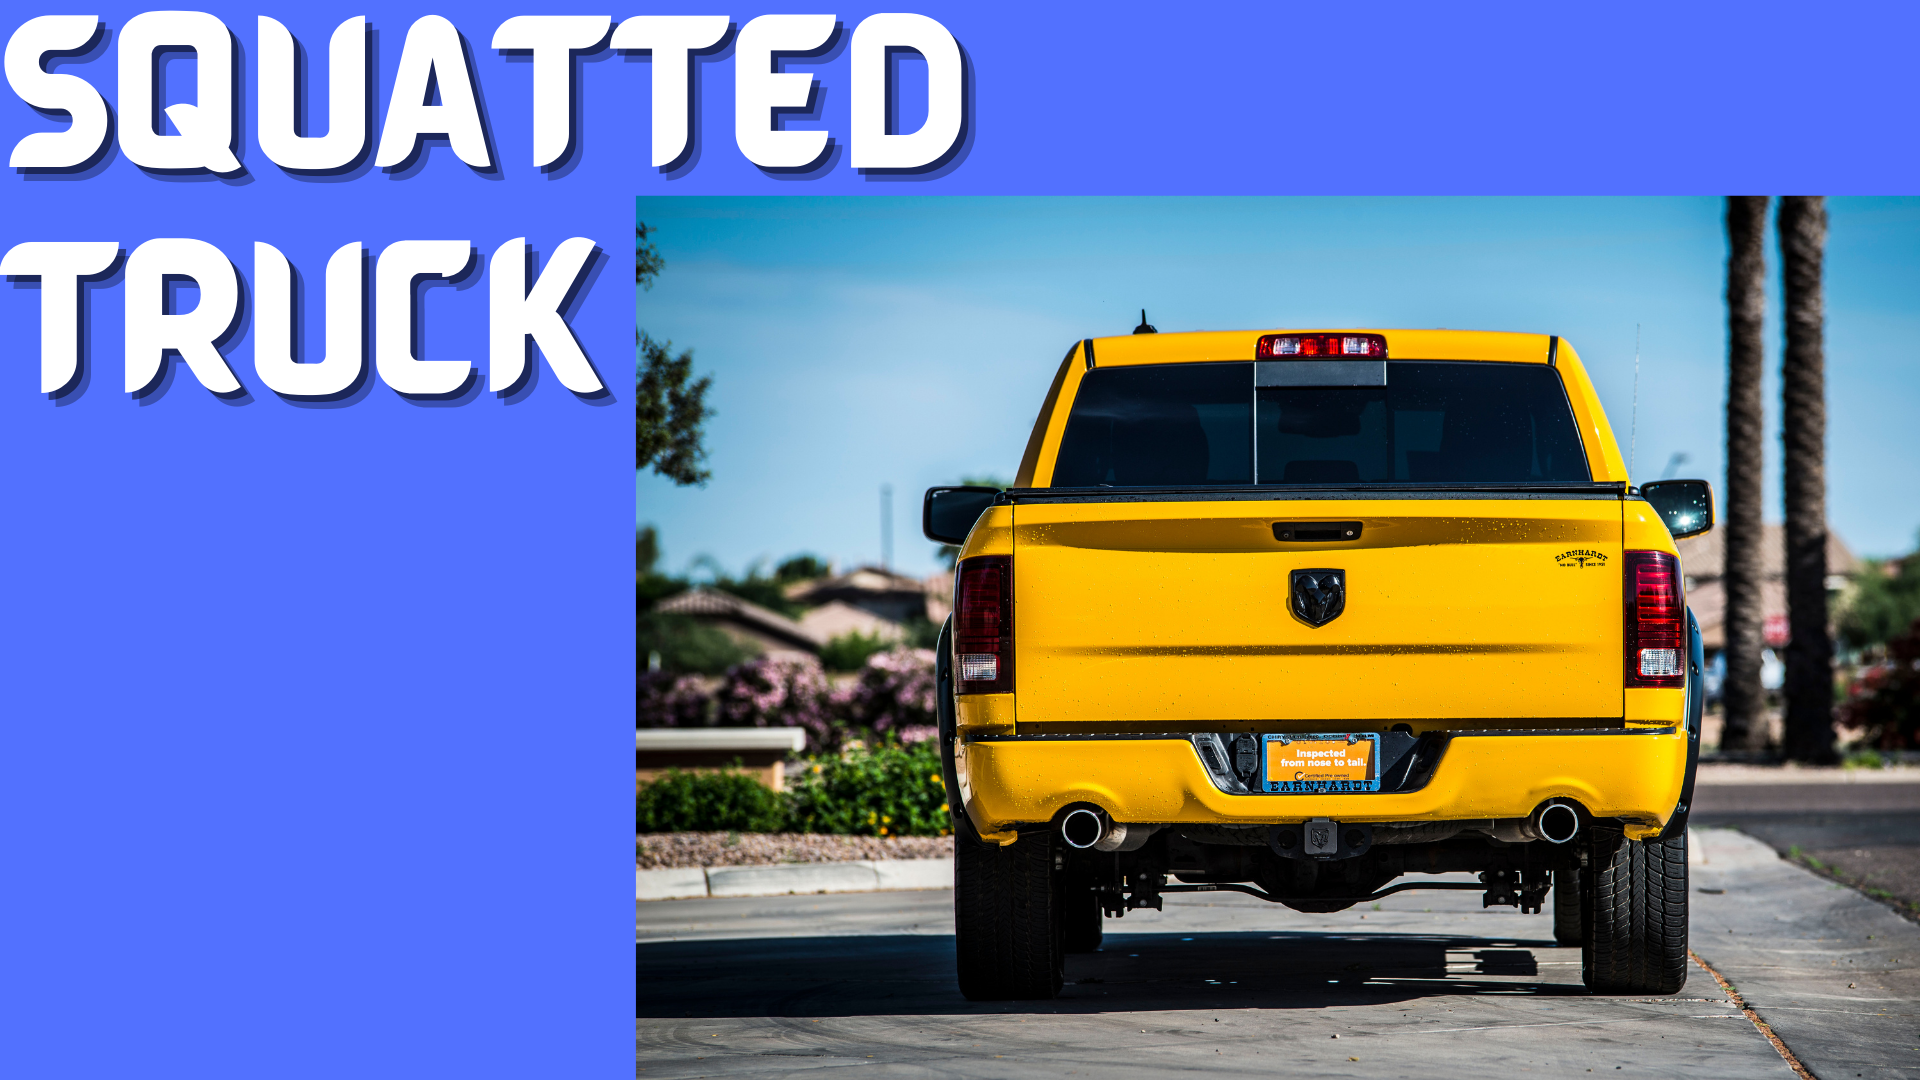 What Is A Squatted Truck & Are Such Trucks Safe?